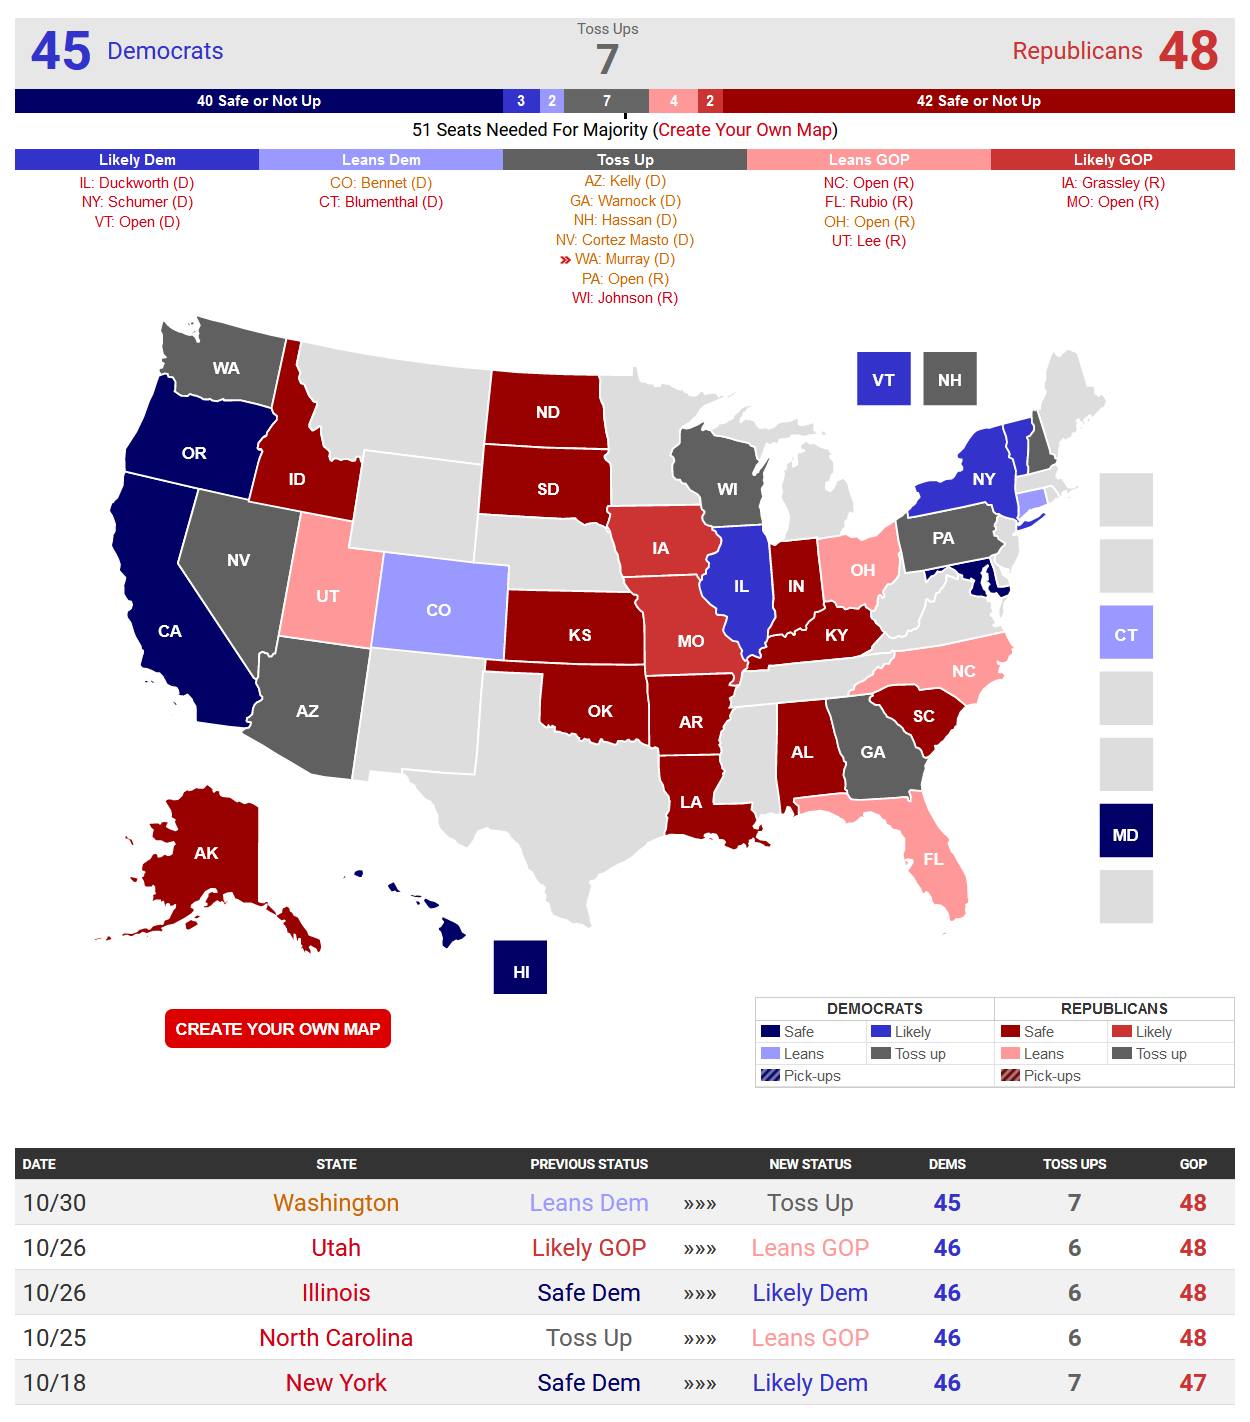 RCP moved Washington from Leans Democrat to Toss Up...